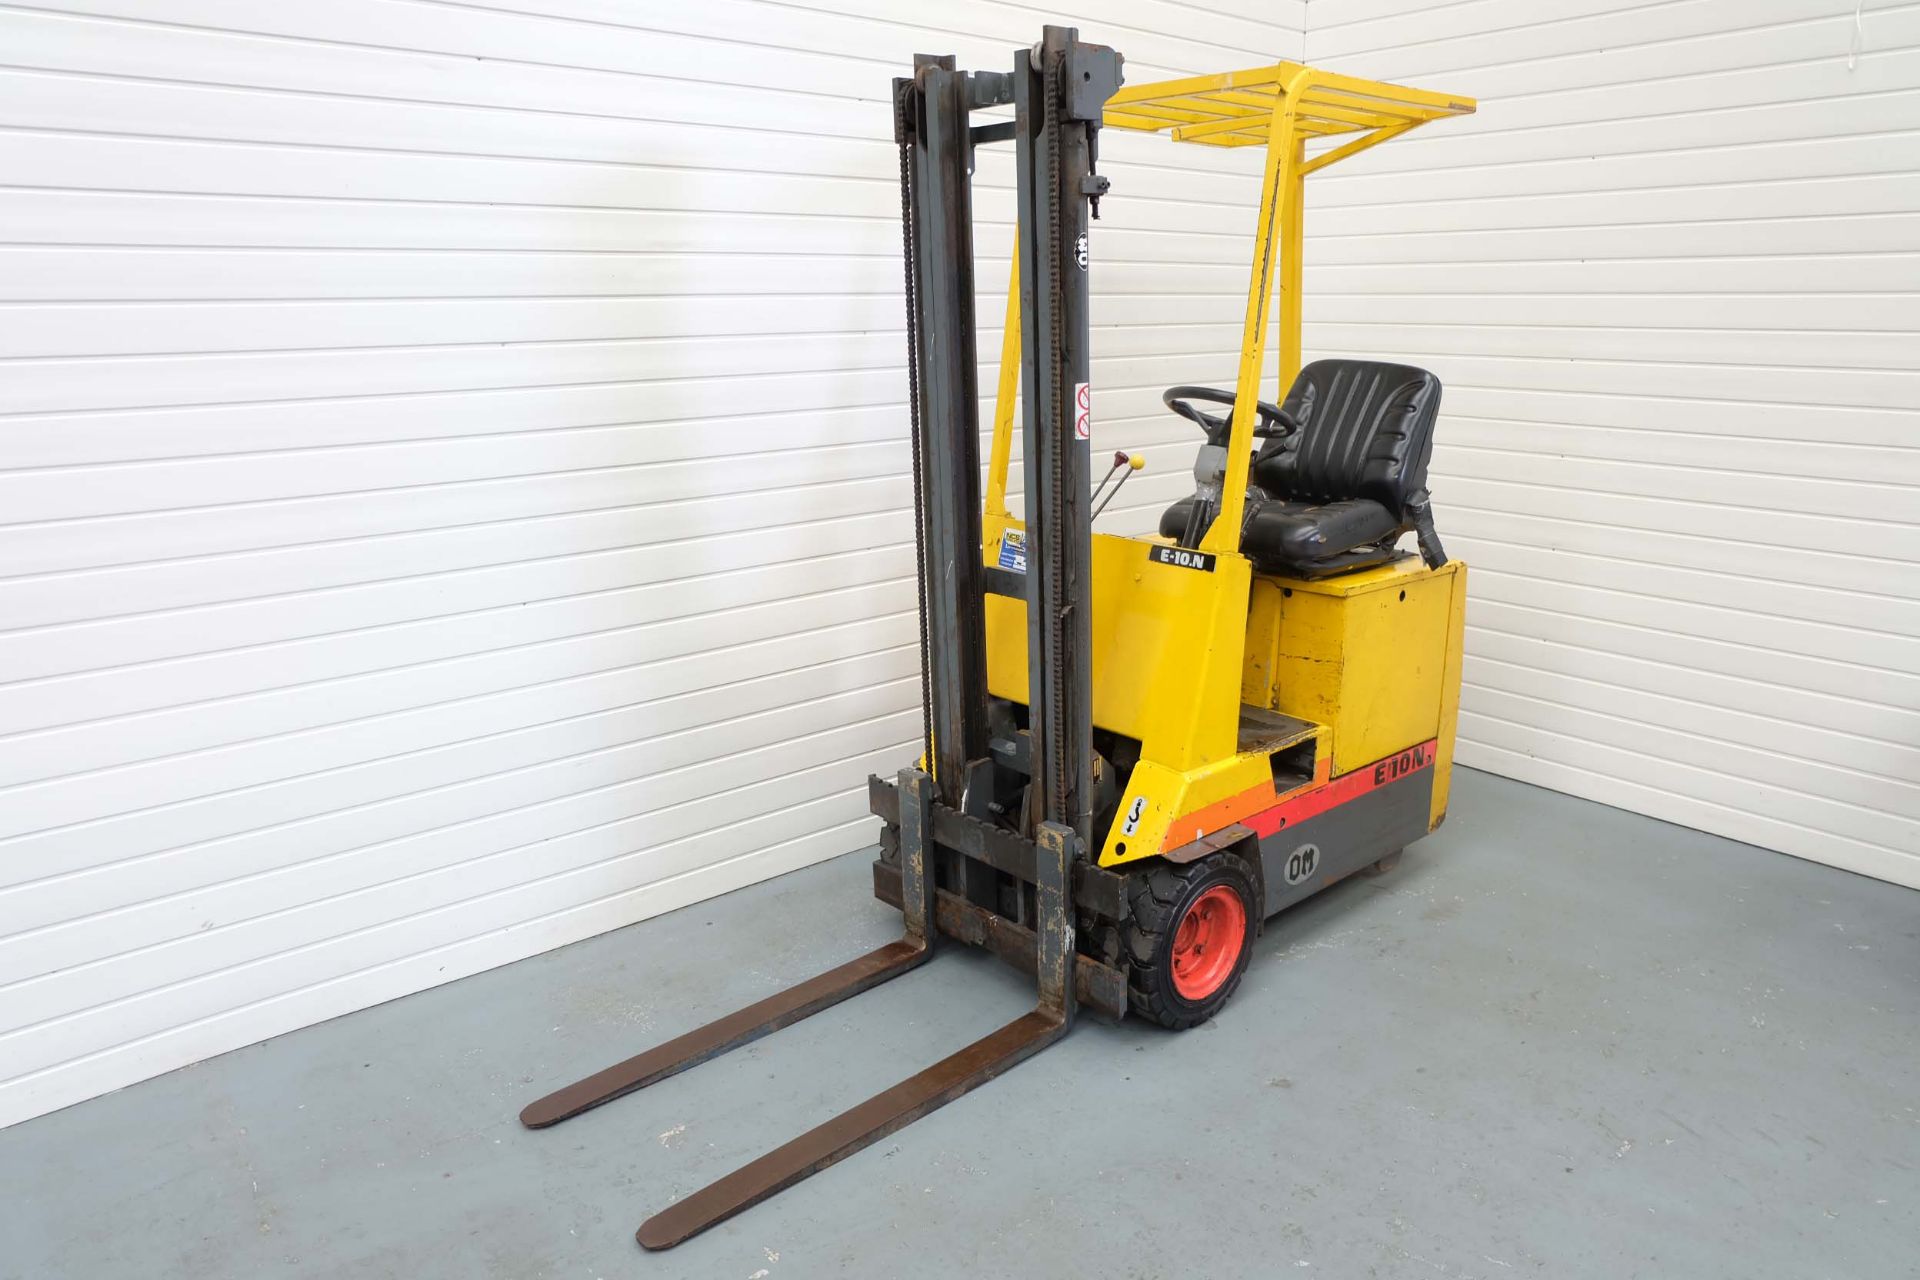 Fiat Model E10 ETI Electric Fork Lift Truck. Lifting Capacity 1000kg. Max Lifting Height 3000mm. Wit - Image 2 of 11